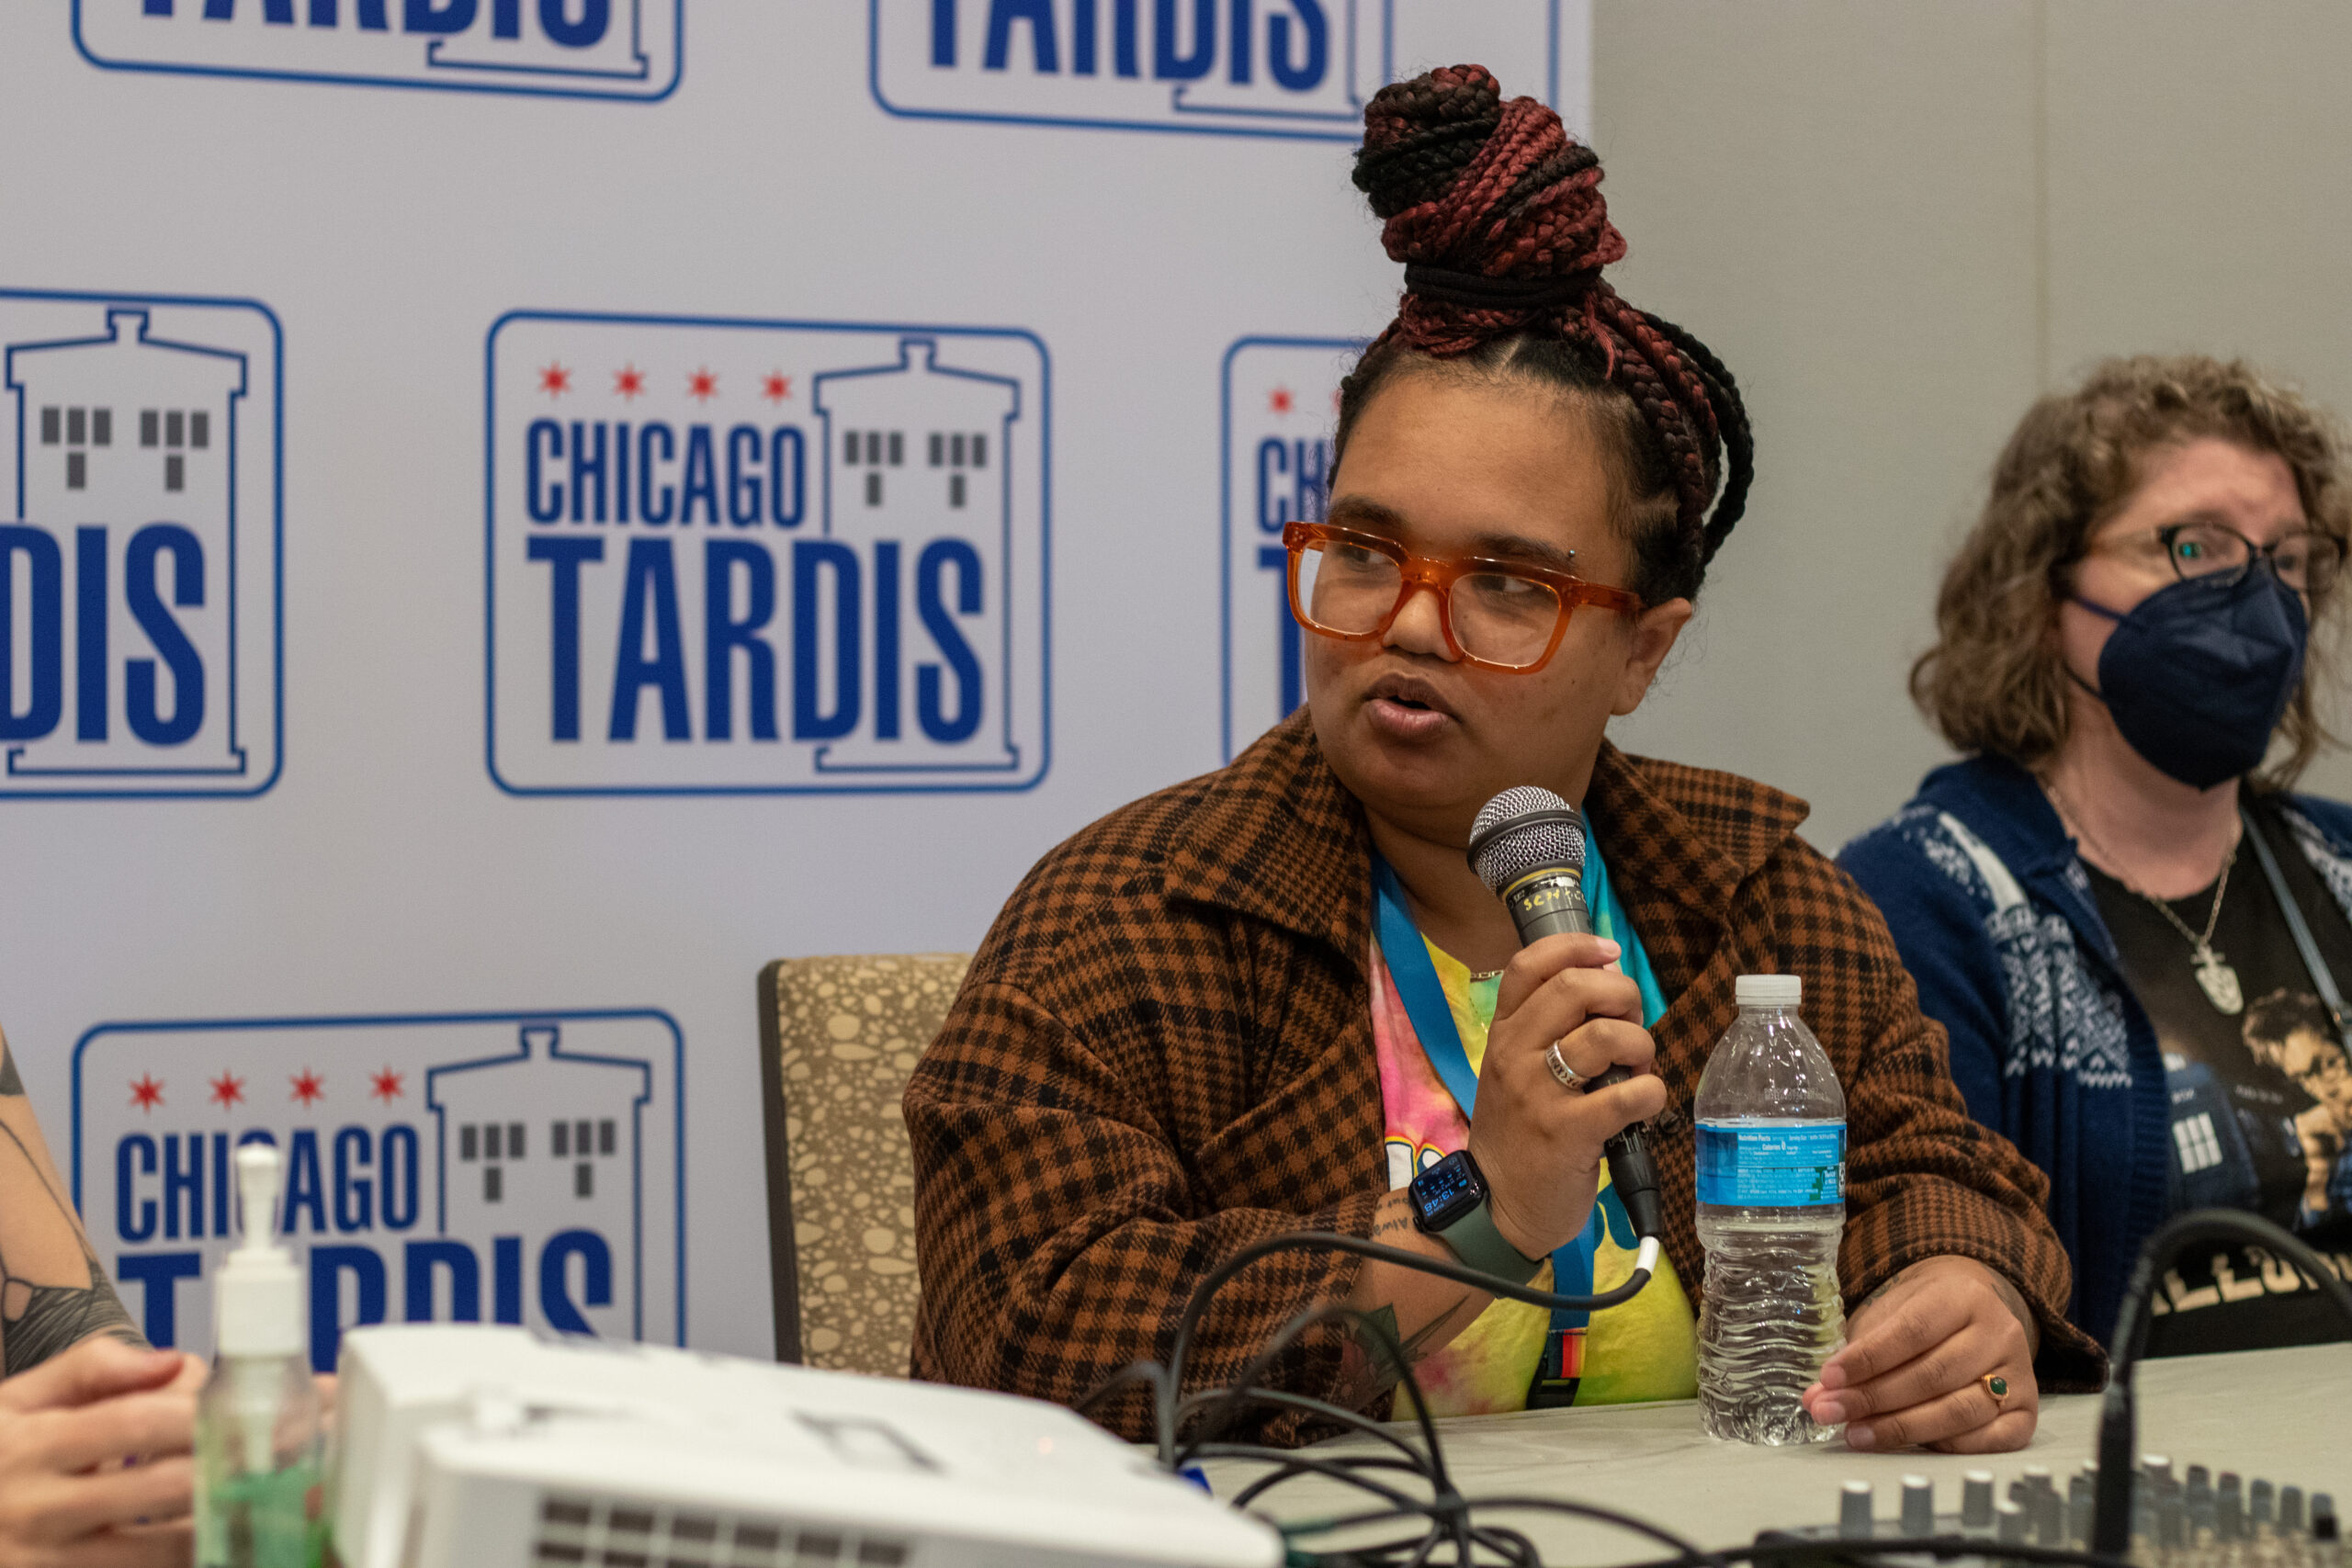 Talia speaking into a microphone at the Chicago Tardis "History of Studying Doctor Who" panel in November 2023